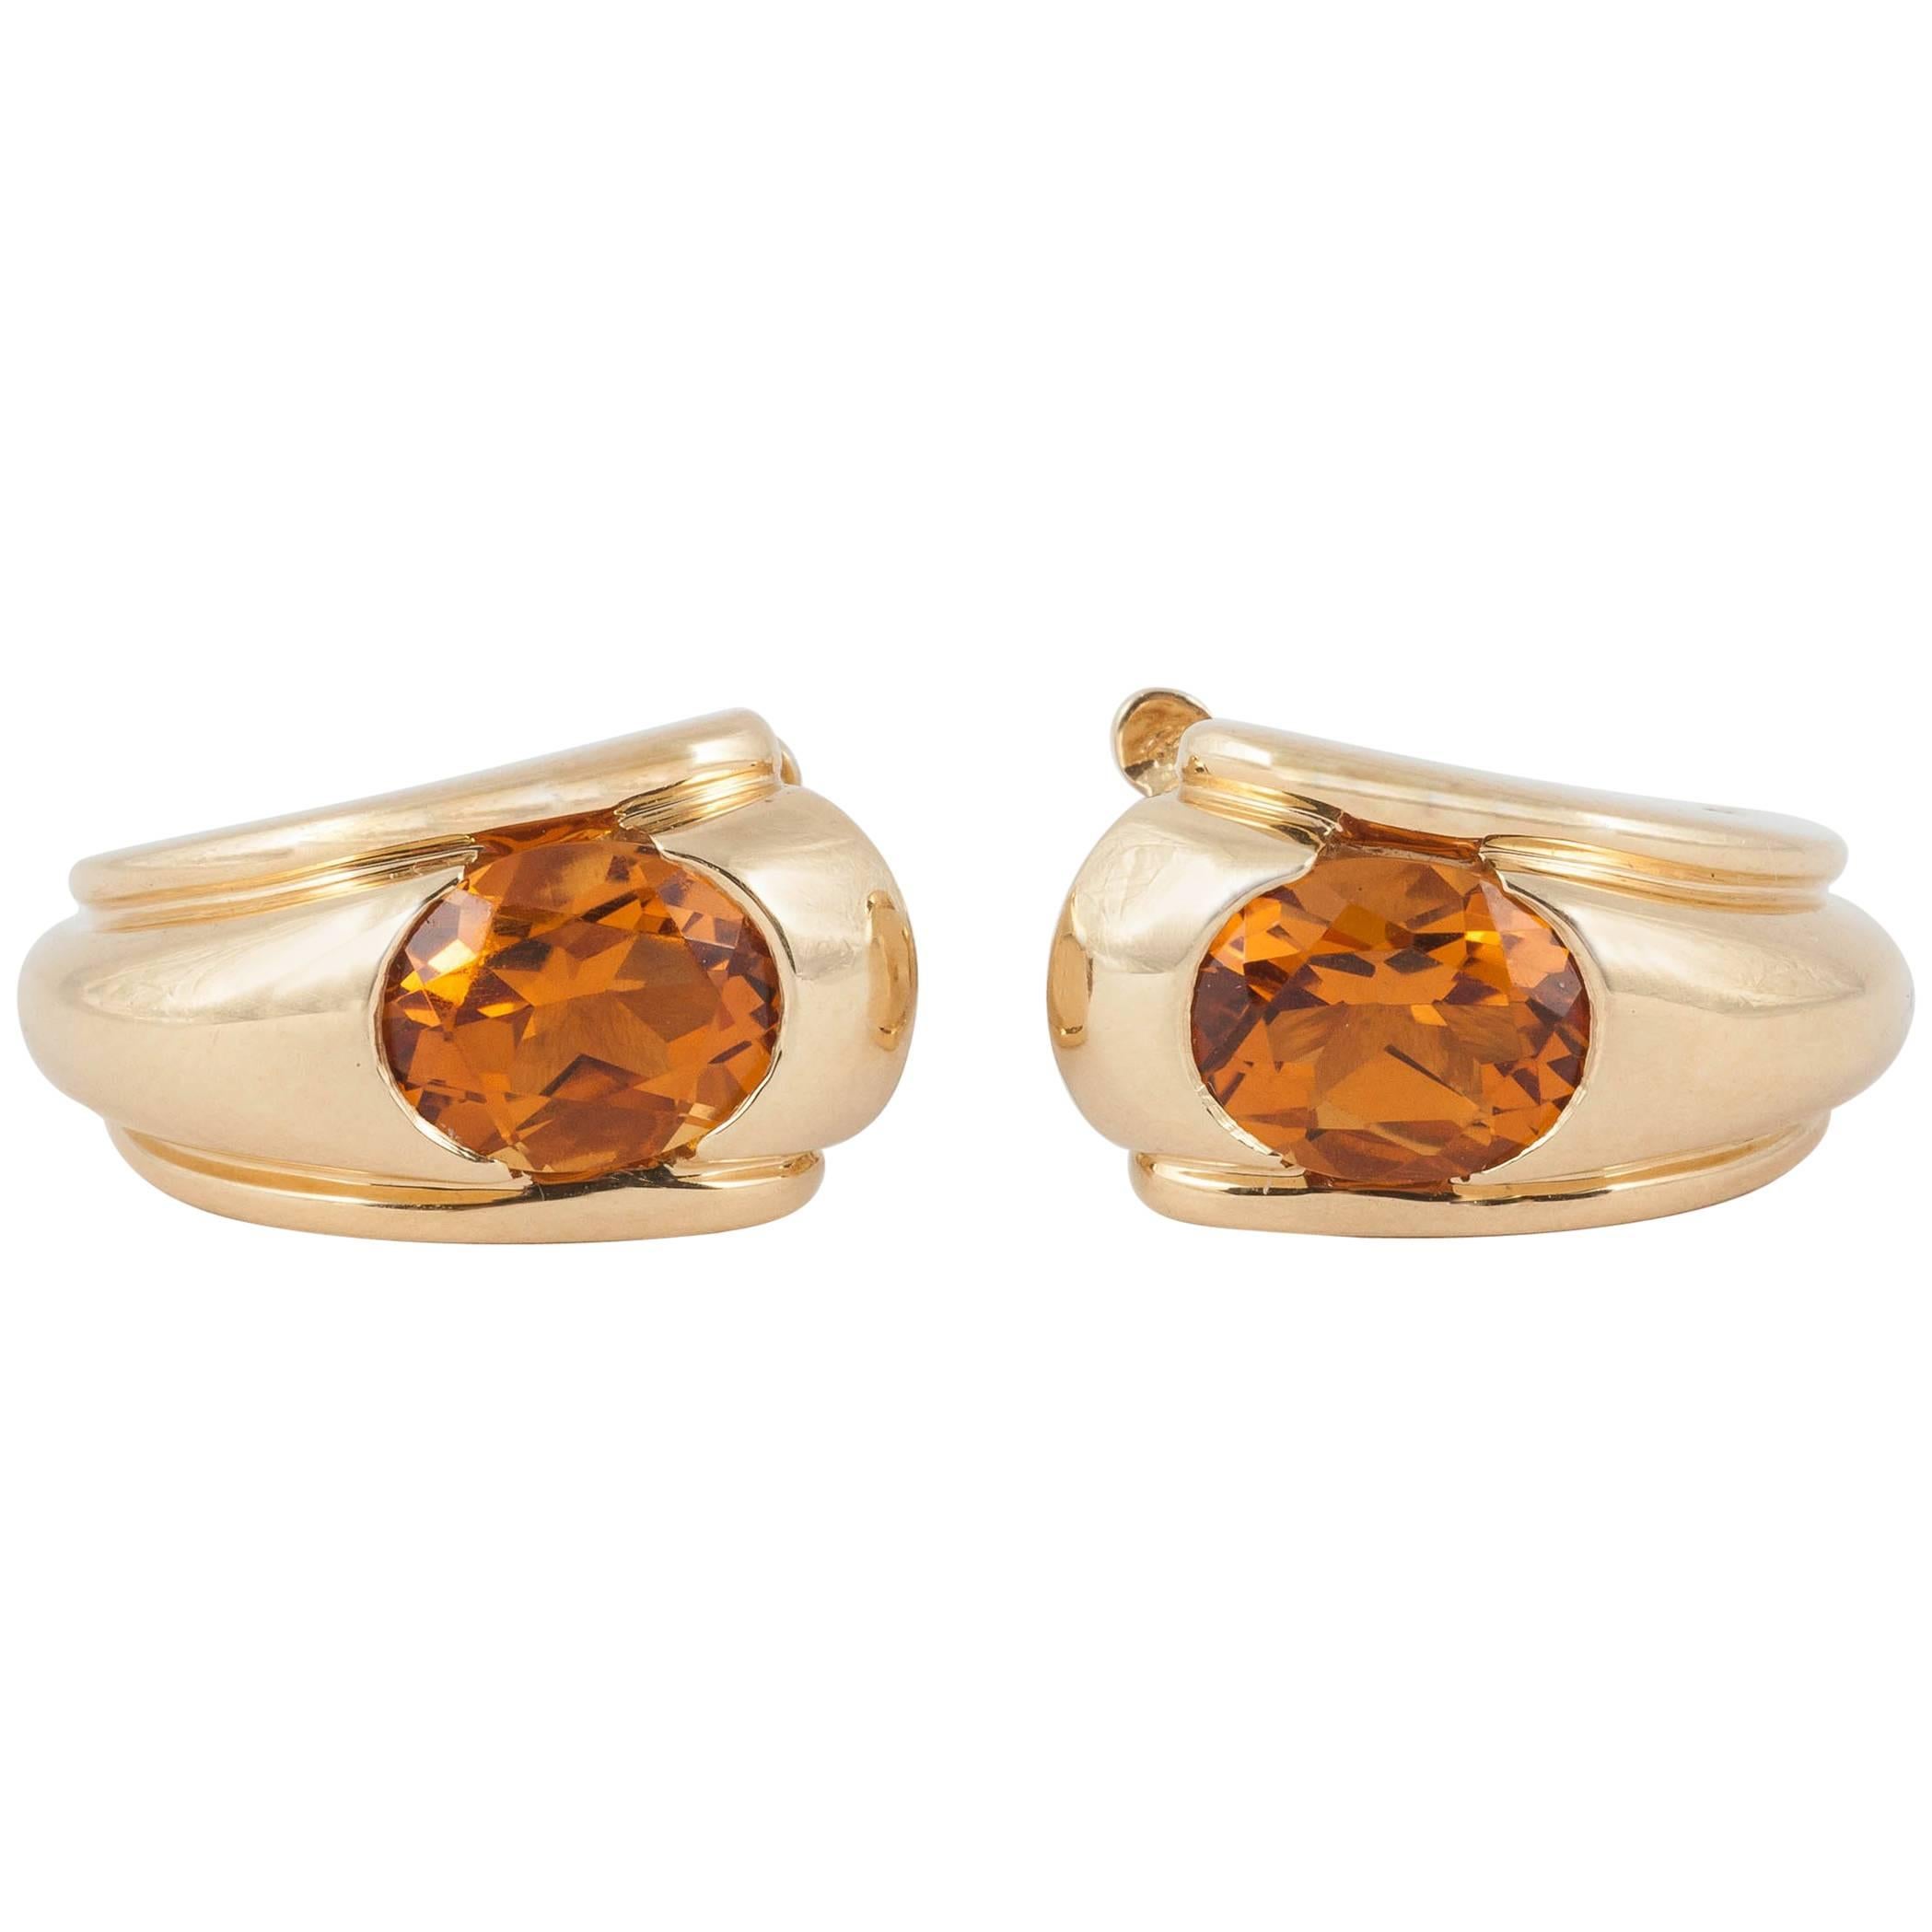  Boucheron of Paris Citrine Gold Creole Shaped Earrings, French c, 1950